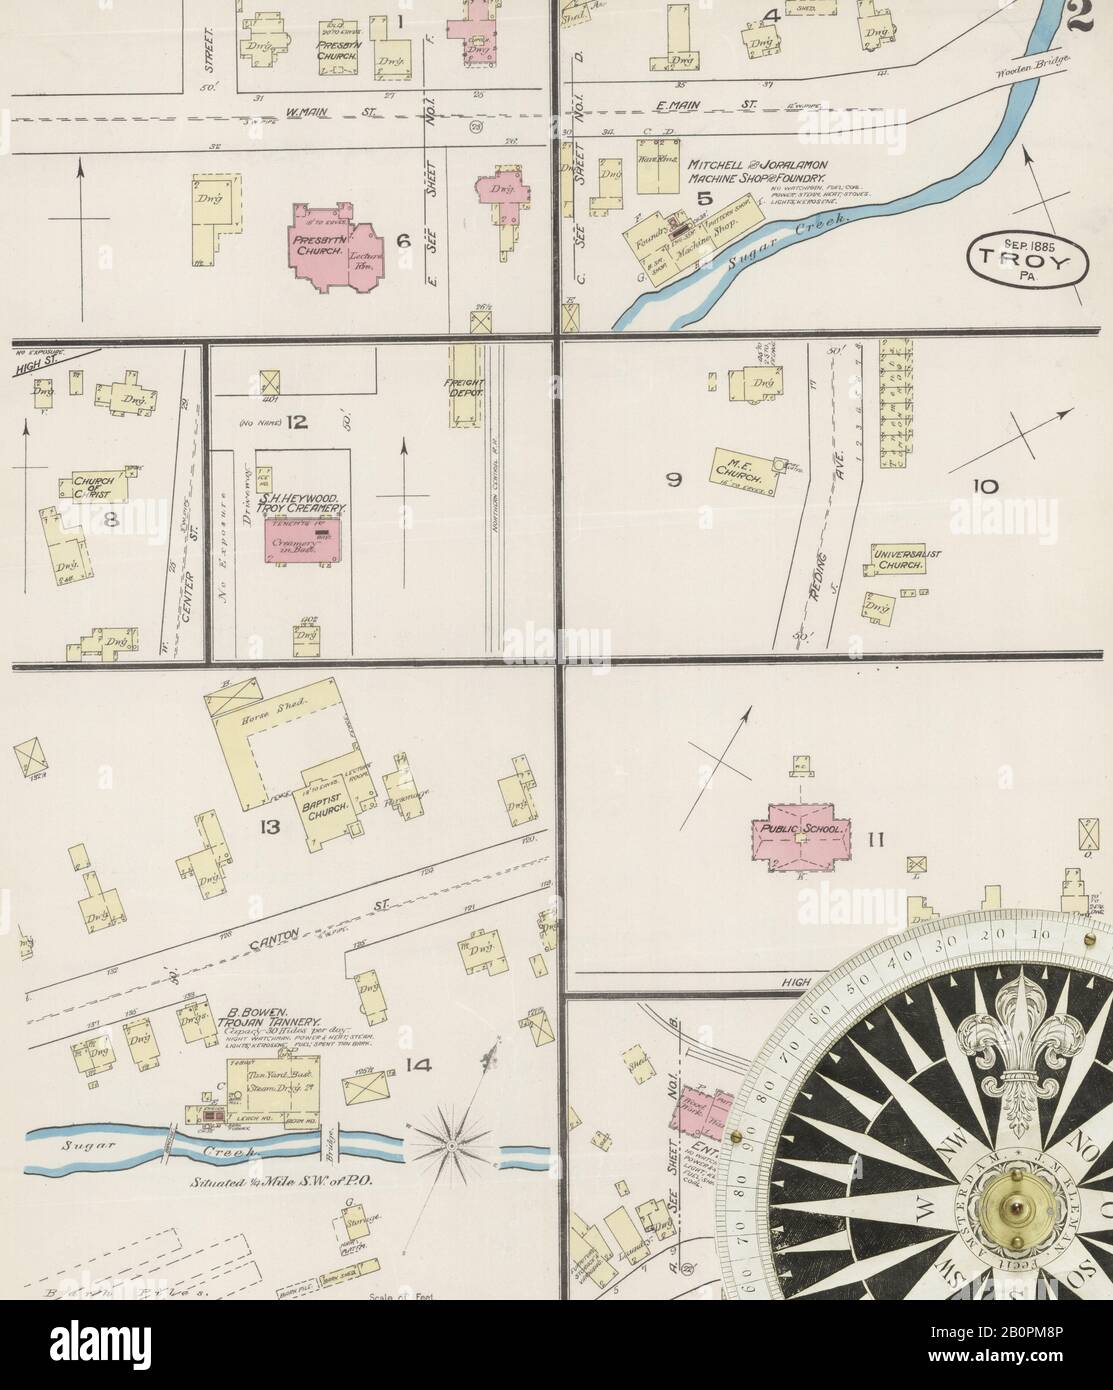 Image 2 of Sanborn Fire Insurance Map from Troy, Bradford County, Pennsylvania. Sep 1885. 2 Sheet(s), America, street map with a Nineteenth Century compass Stock Photo